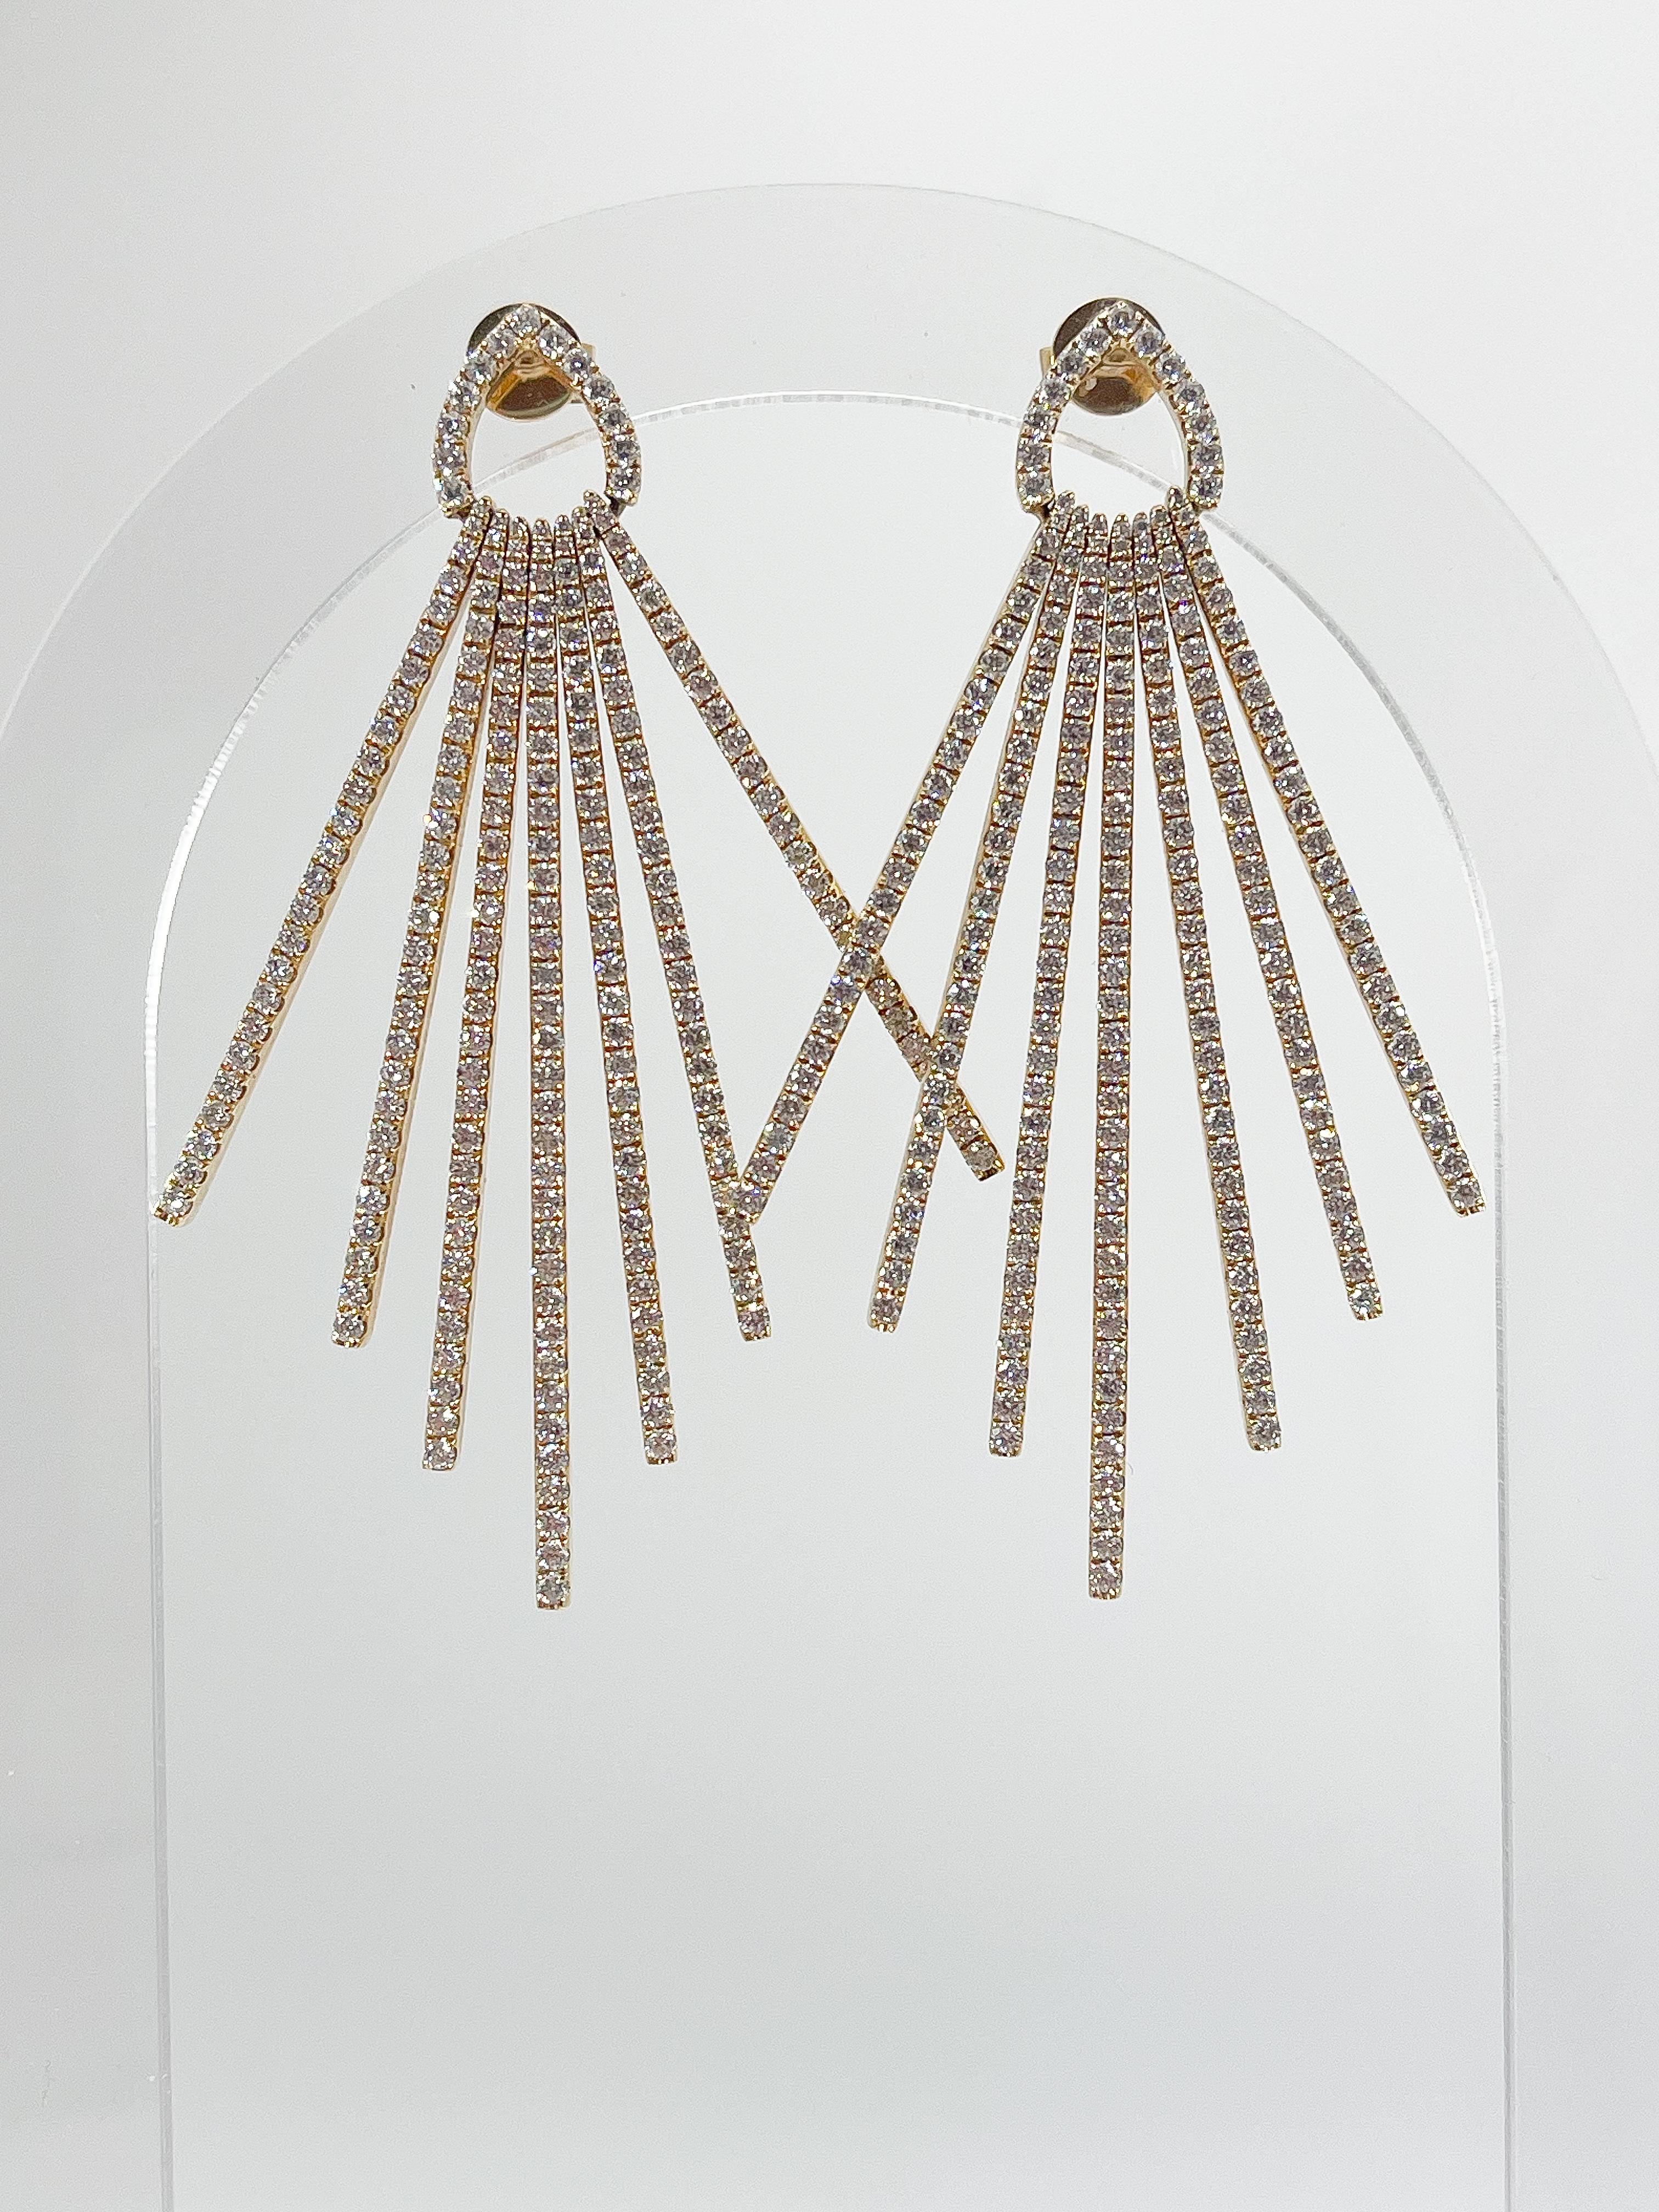 18k yellow gold fancy 4.18 CTW diamond dangle earrings. These earrings have 7 rows of diamonds that measures 2.3 inches from top to bottom and they have a total weight of 17 grams.